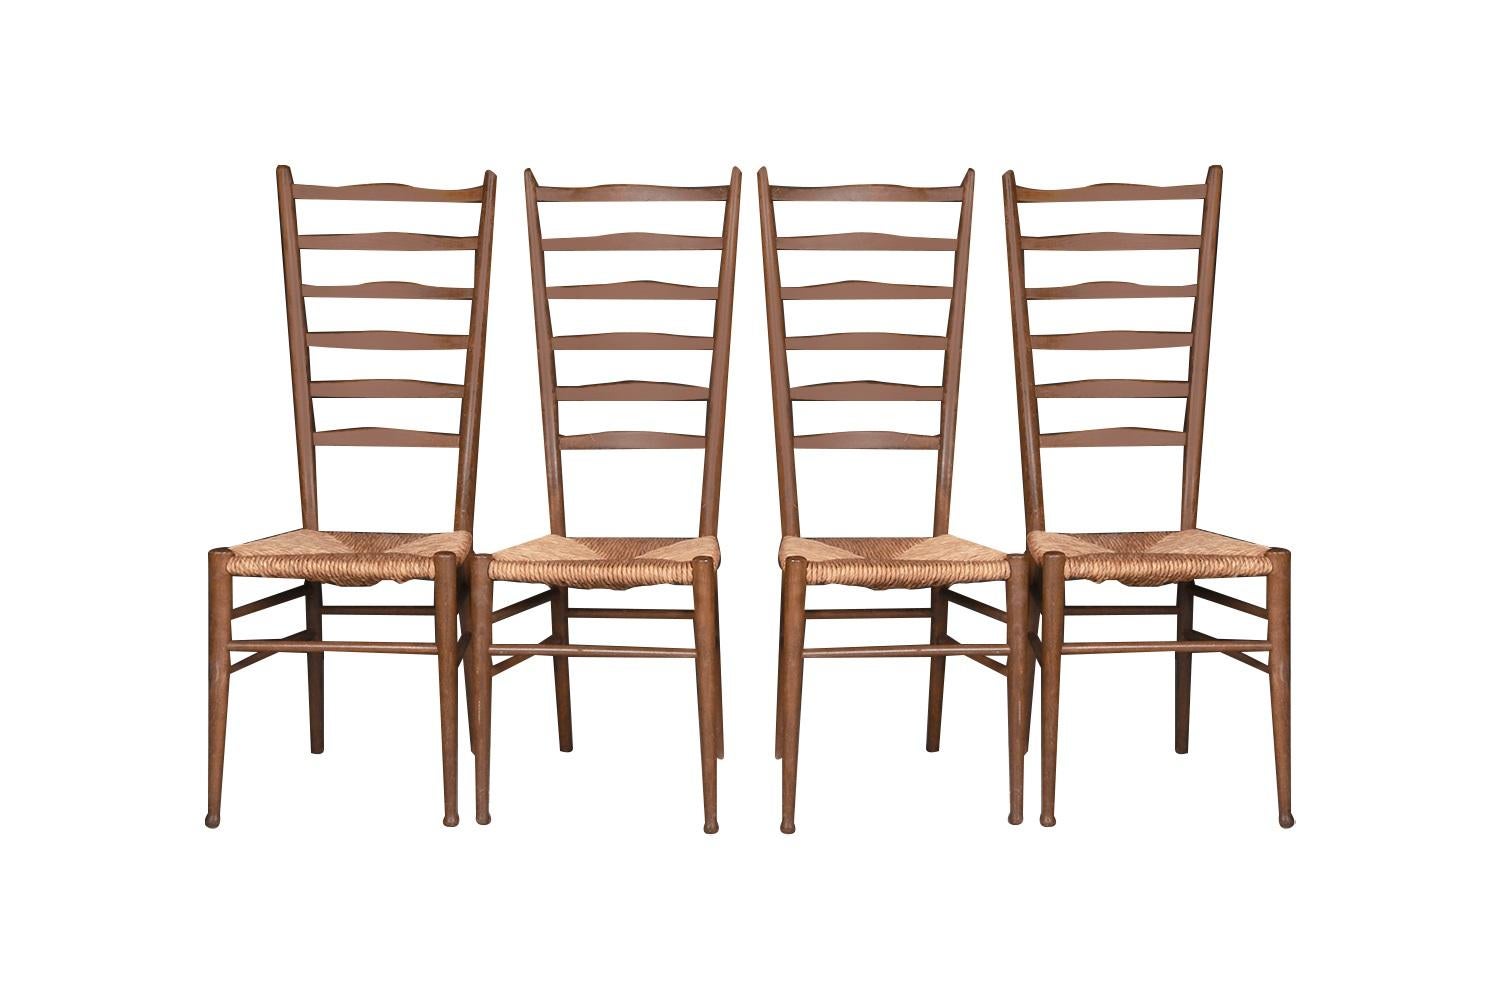 Exceptional set of four tall ladder back dining side chairs in the style of Gio Ponti, Italy, c. 1950s. Each chair features a high back, with six horizontal slats, woven natural paper cord rush seats, and a handsome leg design with splayed back legs